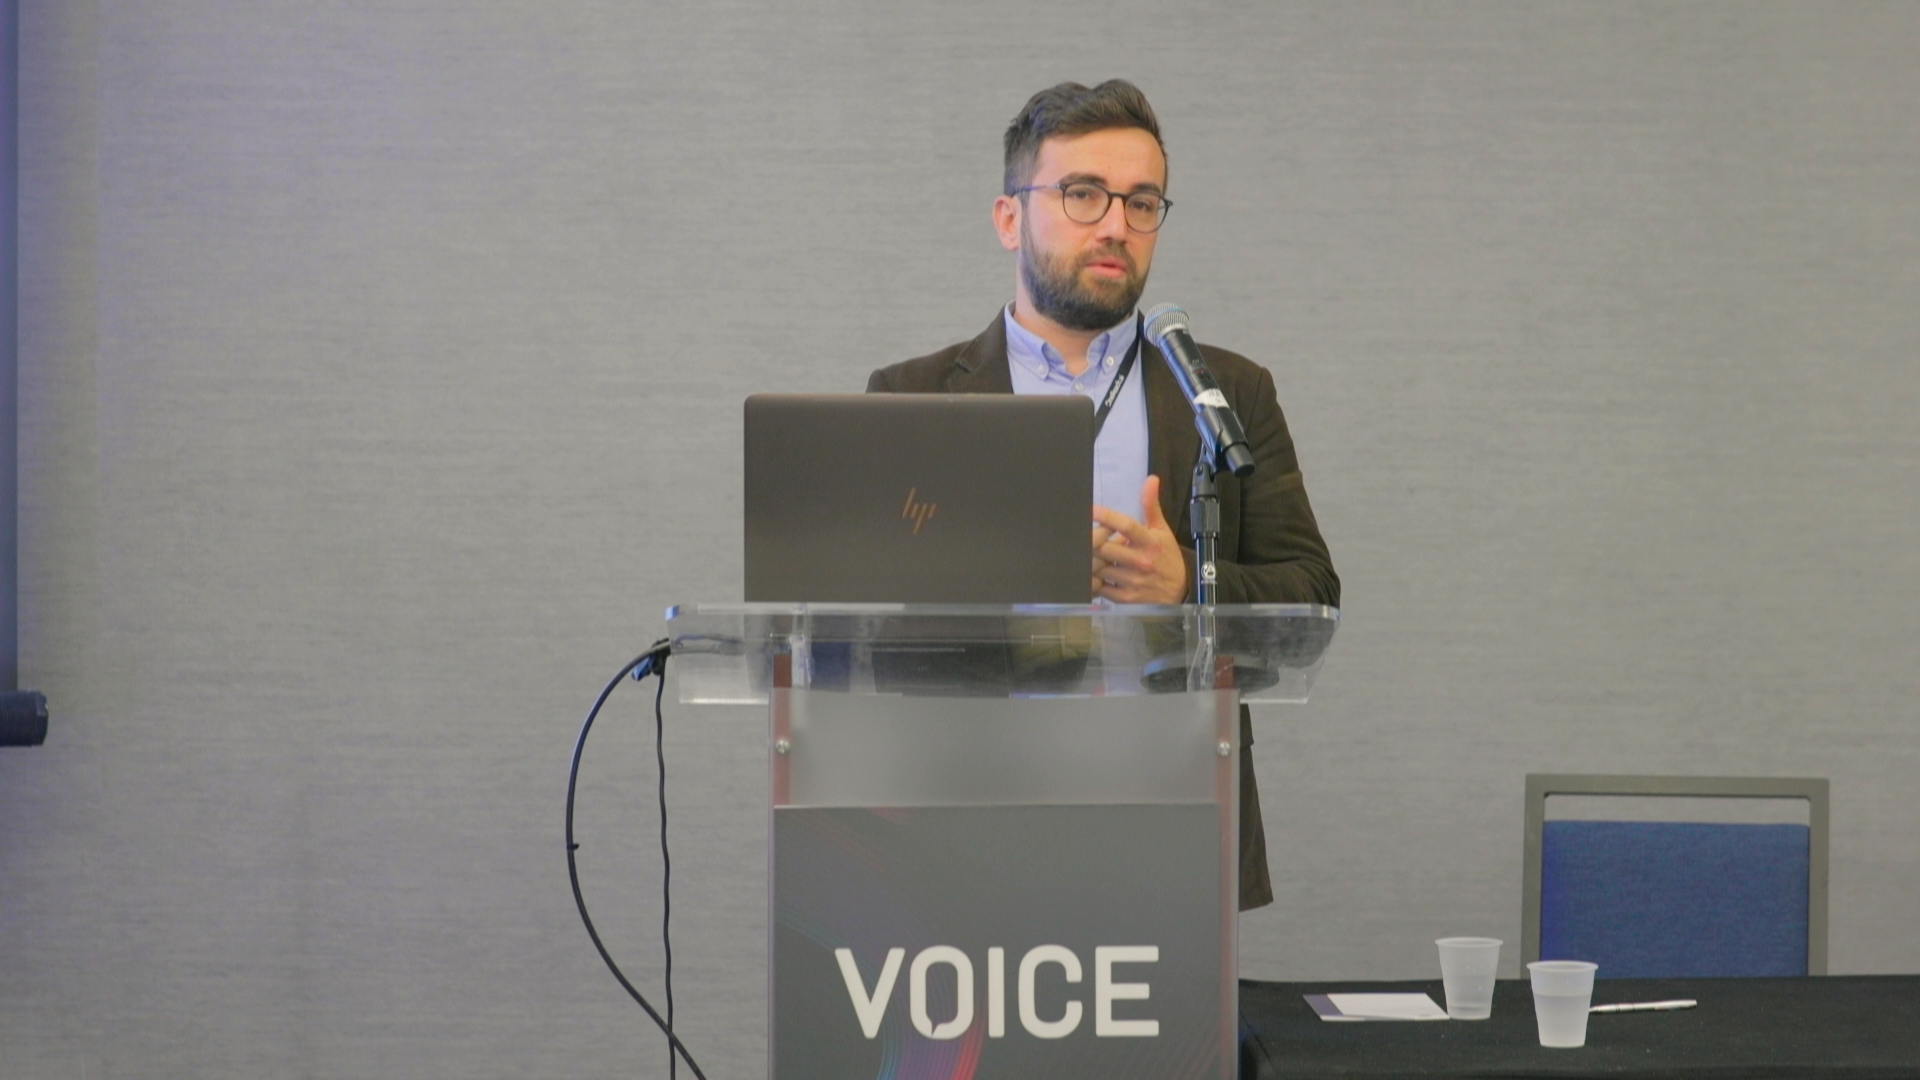 VOICE22 | OVON Healthcare Track- Healthcare Needs To Be “Vocal”! | Emre Sezgin